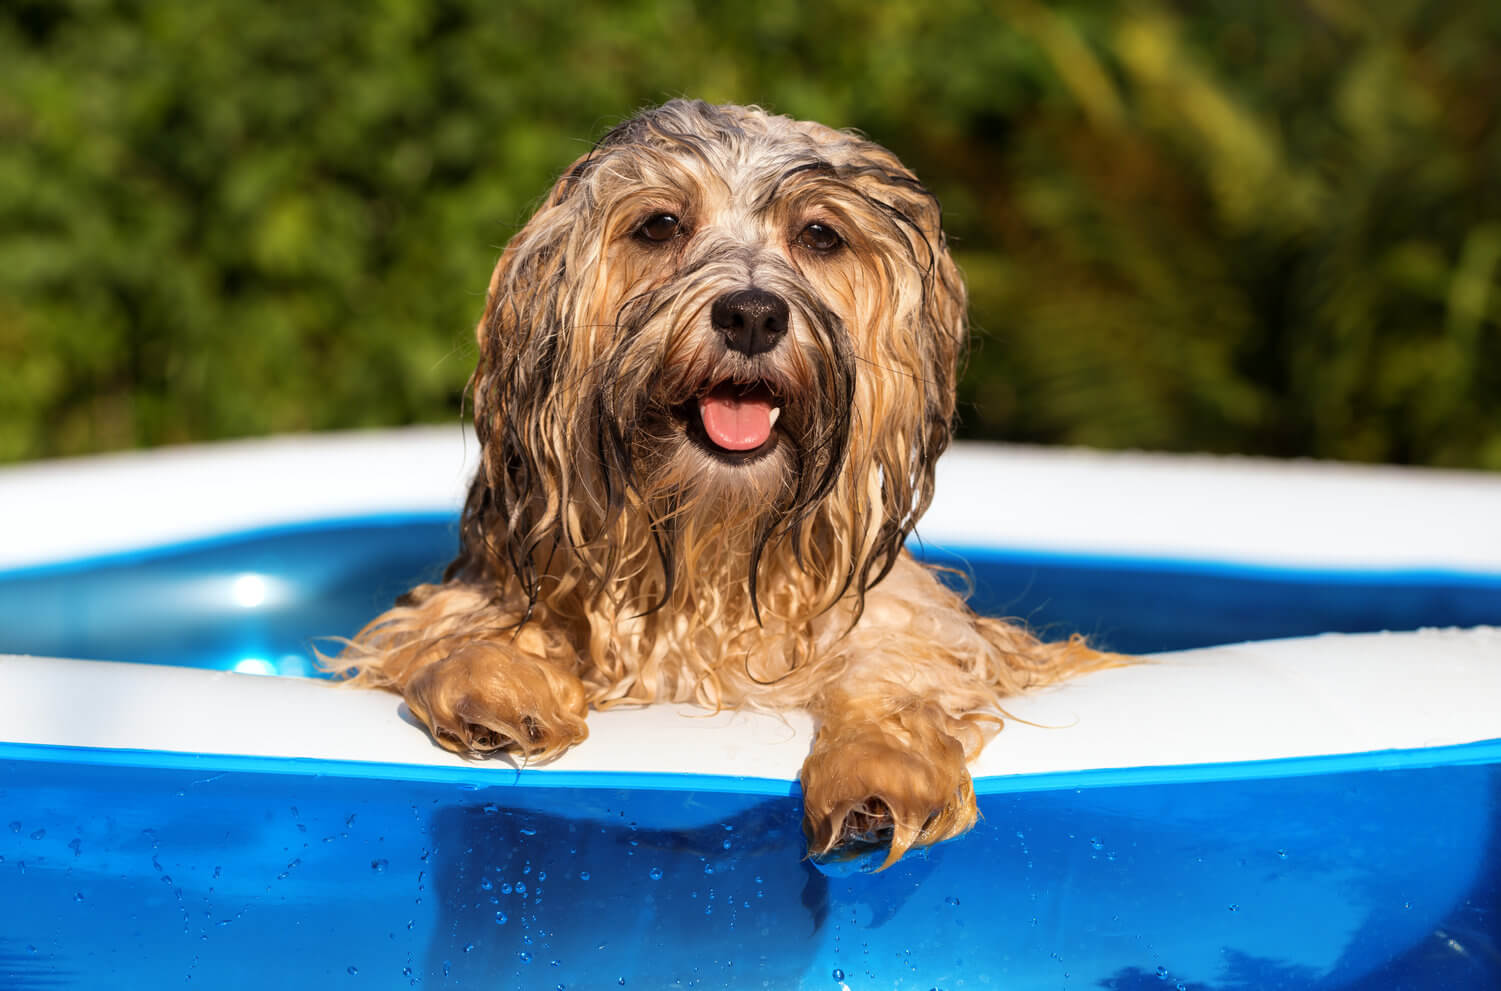 Dog in a blue and white wading pool